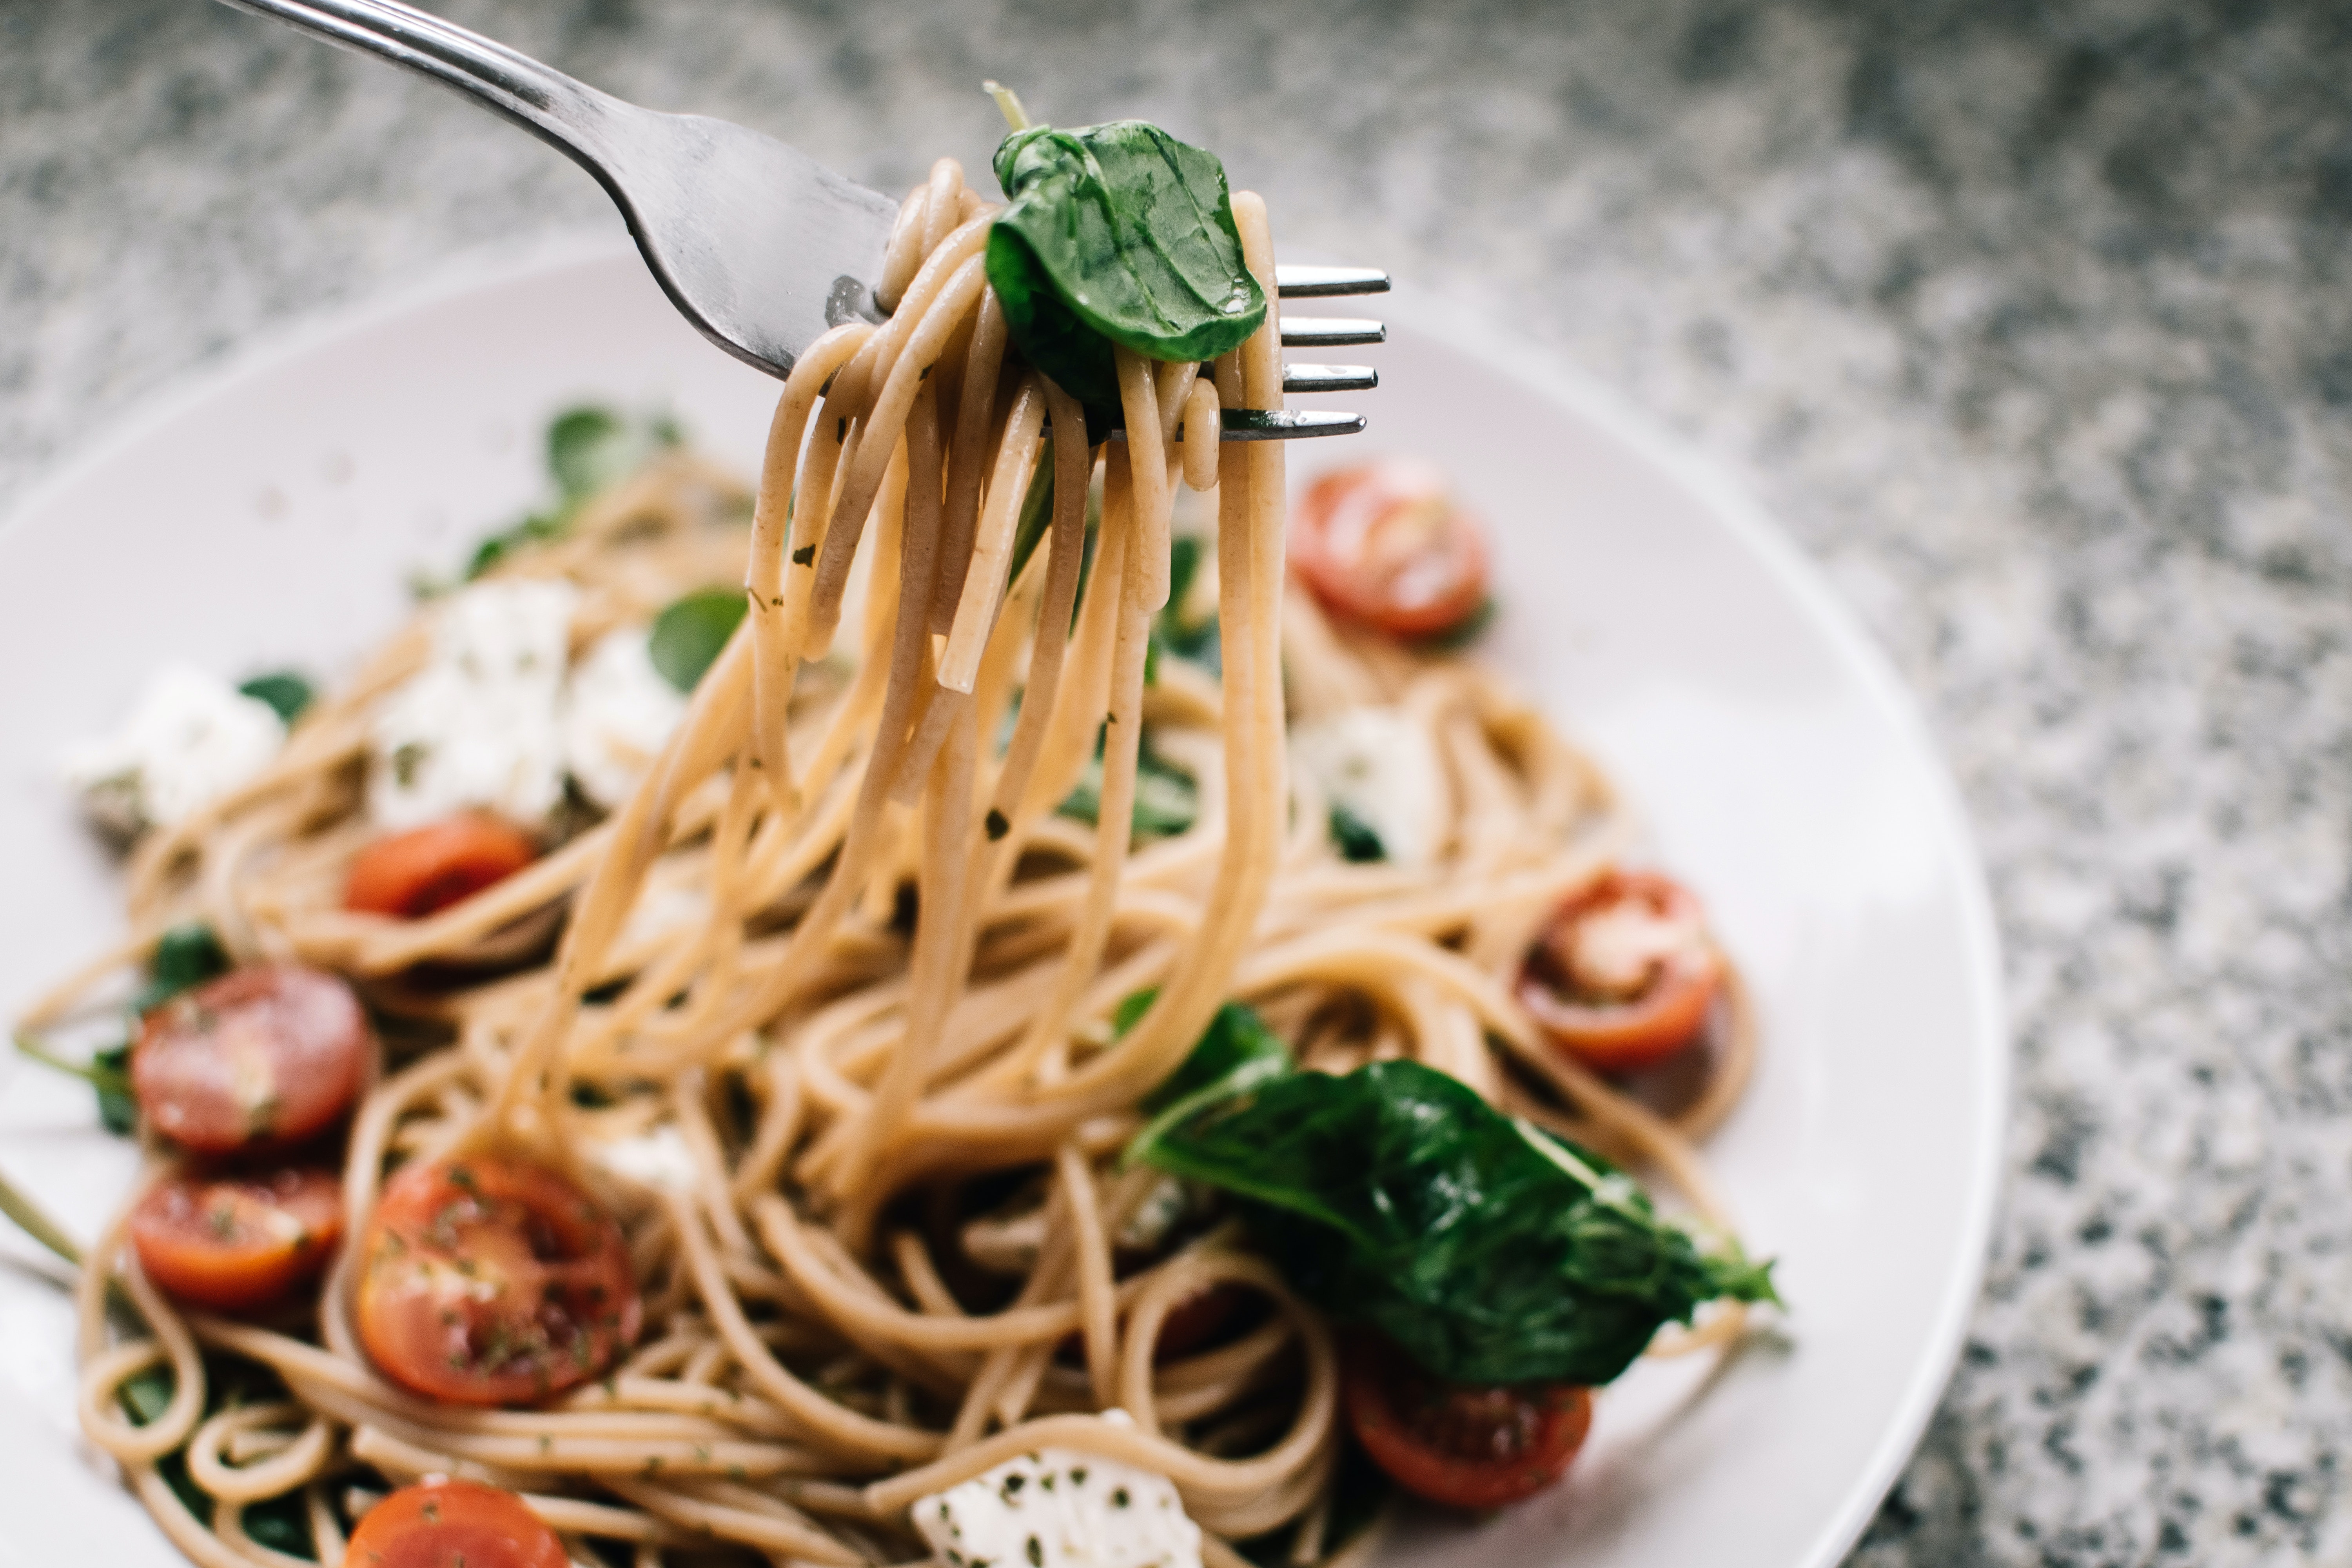 https://www.foodkonjac.com/news/ Which-pasta-is-best-for-weight-loss/